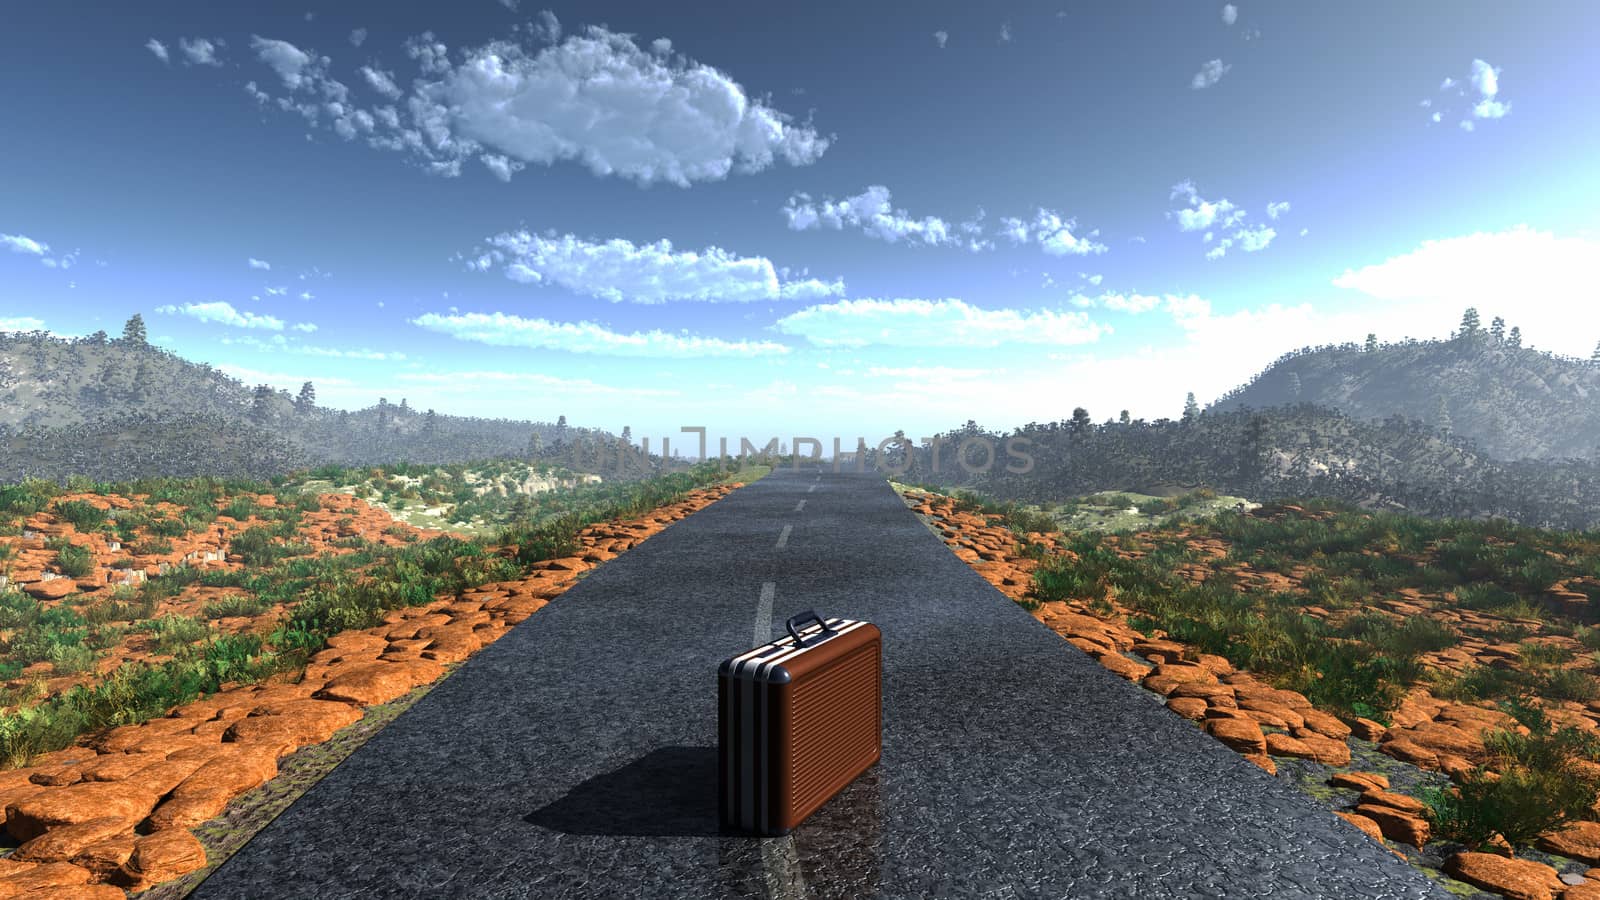 suitcase on a deserted road as adventure concept background by denisgo